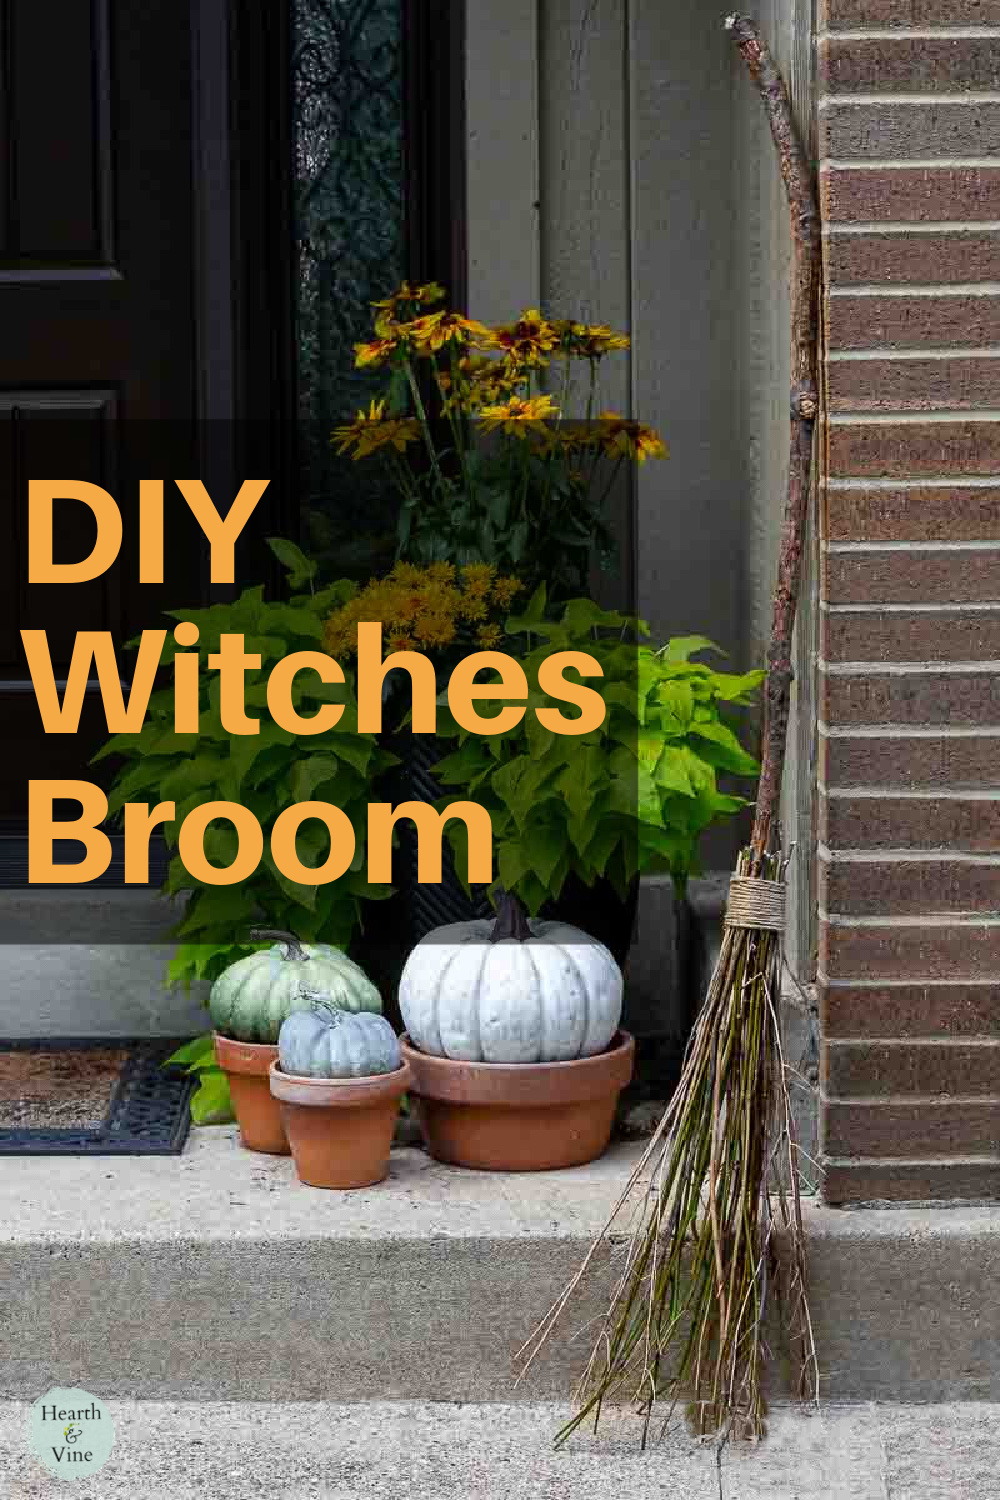 The front porch of a house decorated with fall pumpkins and a handmade witches broom on the side.